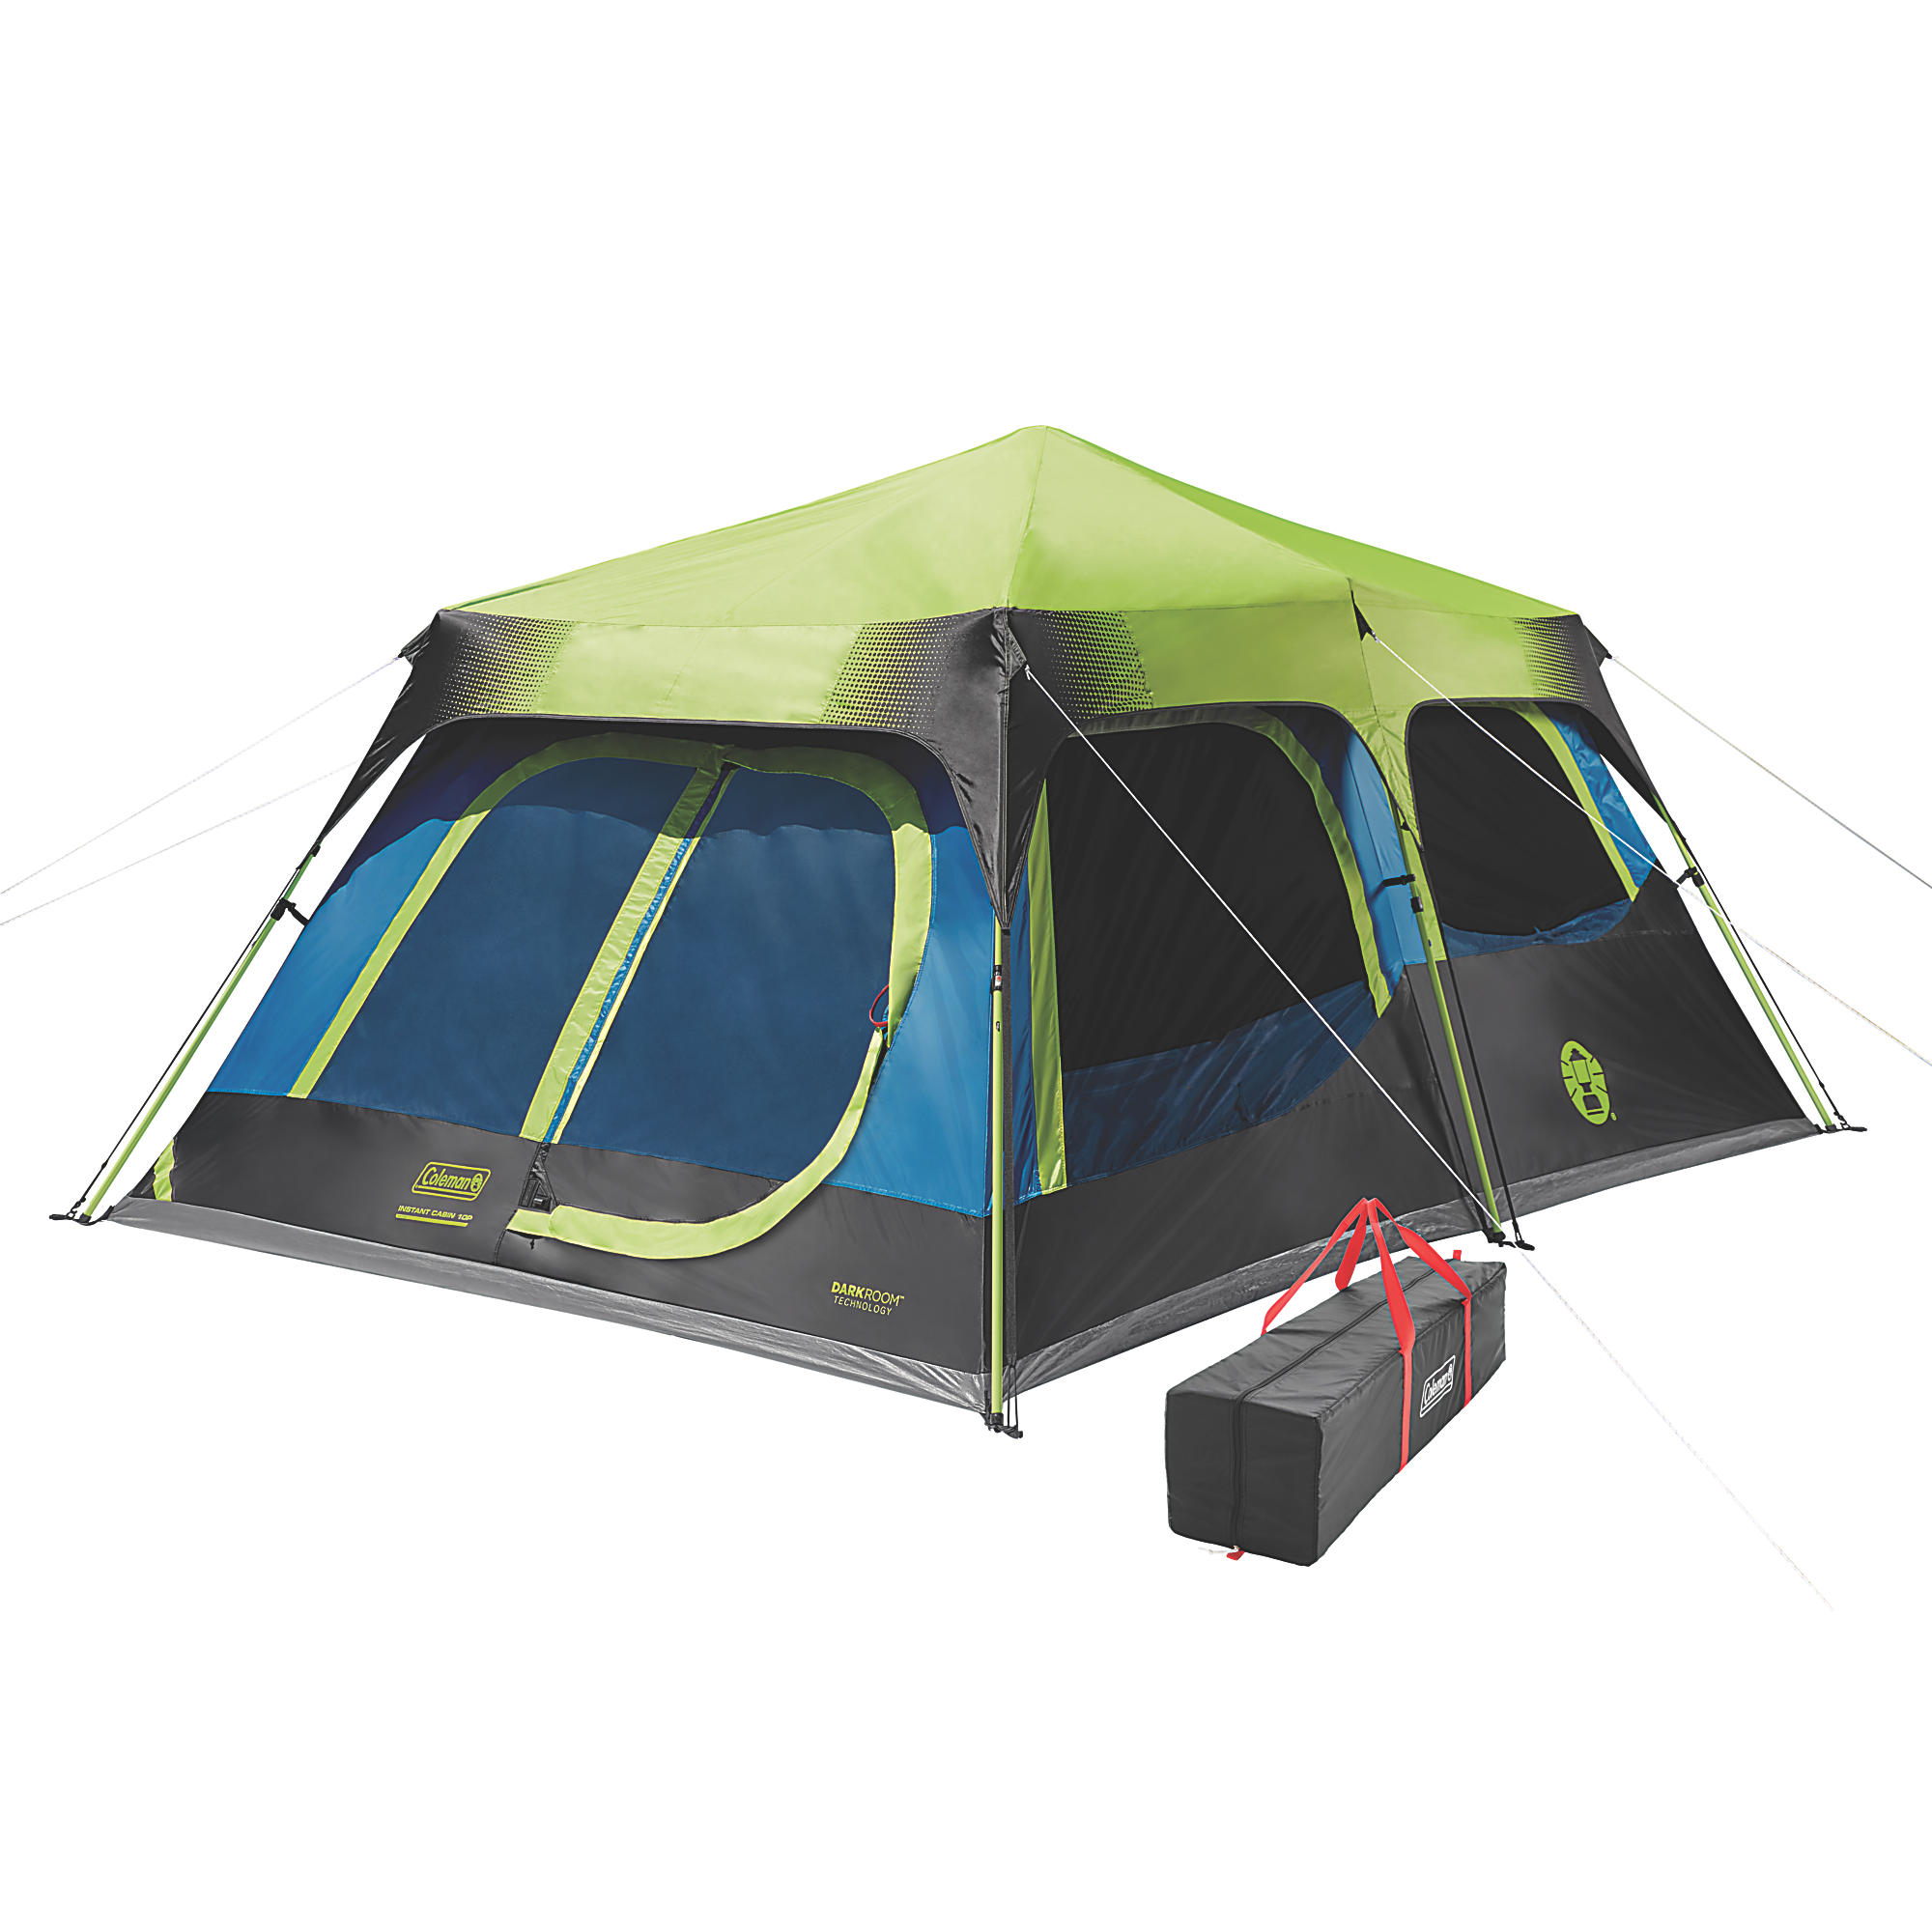 Coleman® 10-Person Dark Room™ Cabin Camping Tent with Instant Setup, 1 Room, Blue - image 1 of 6